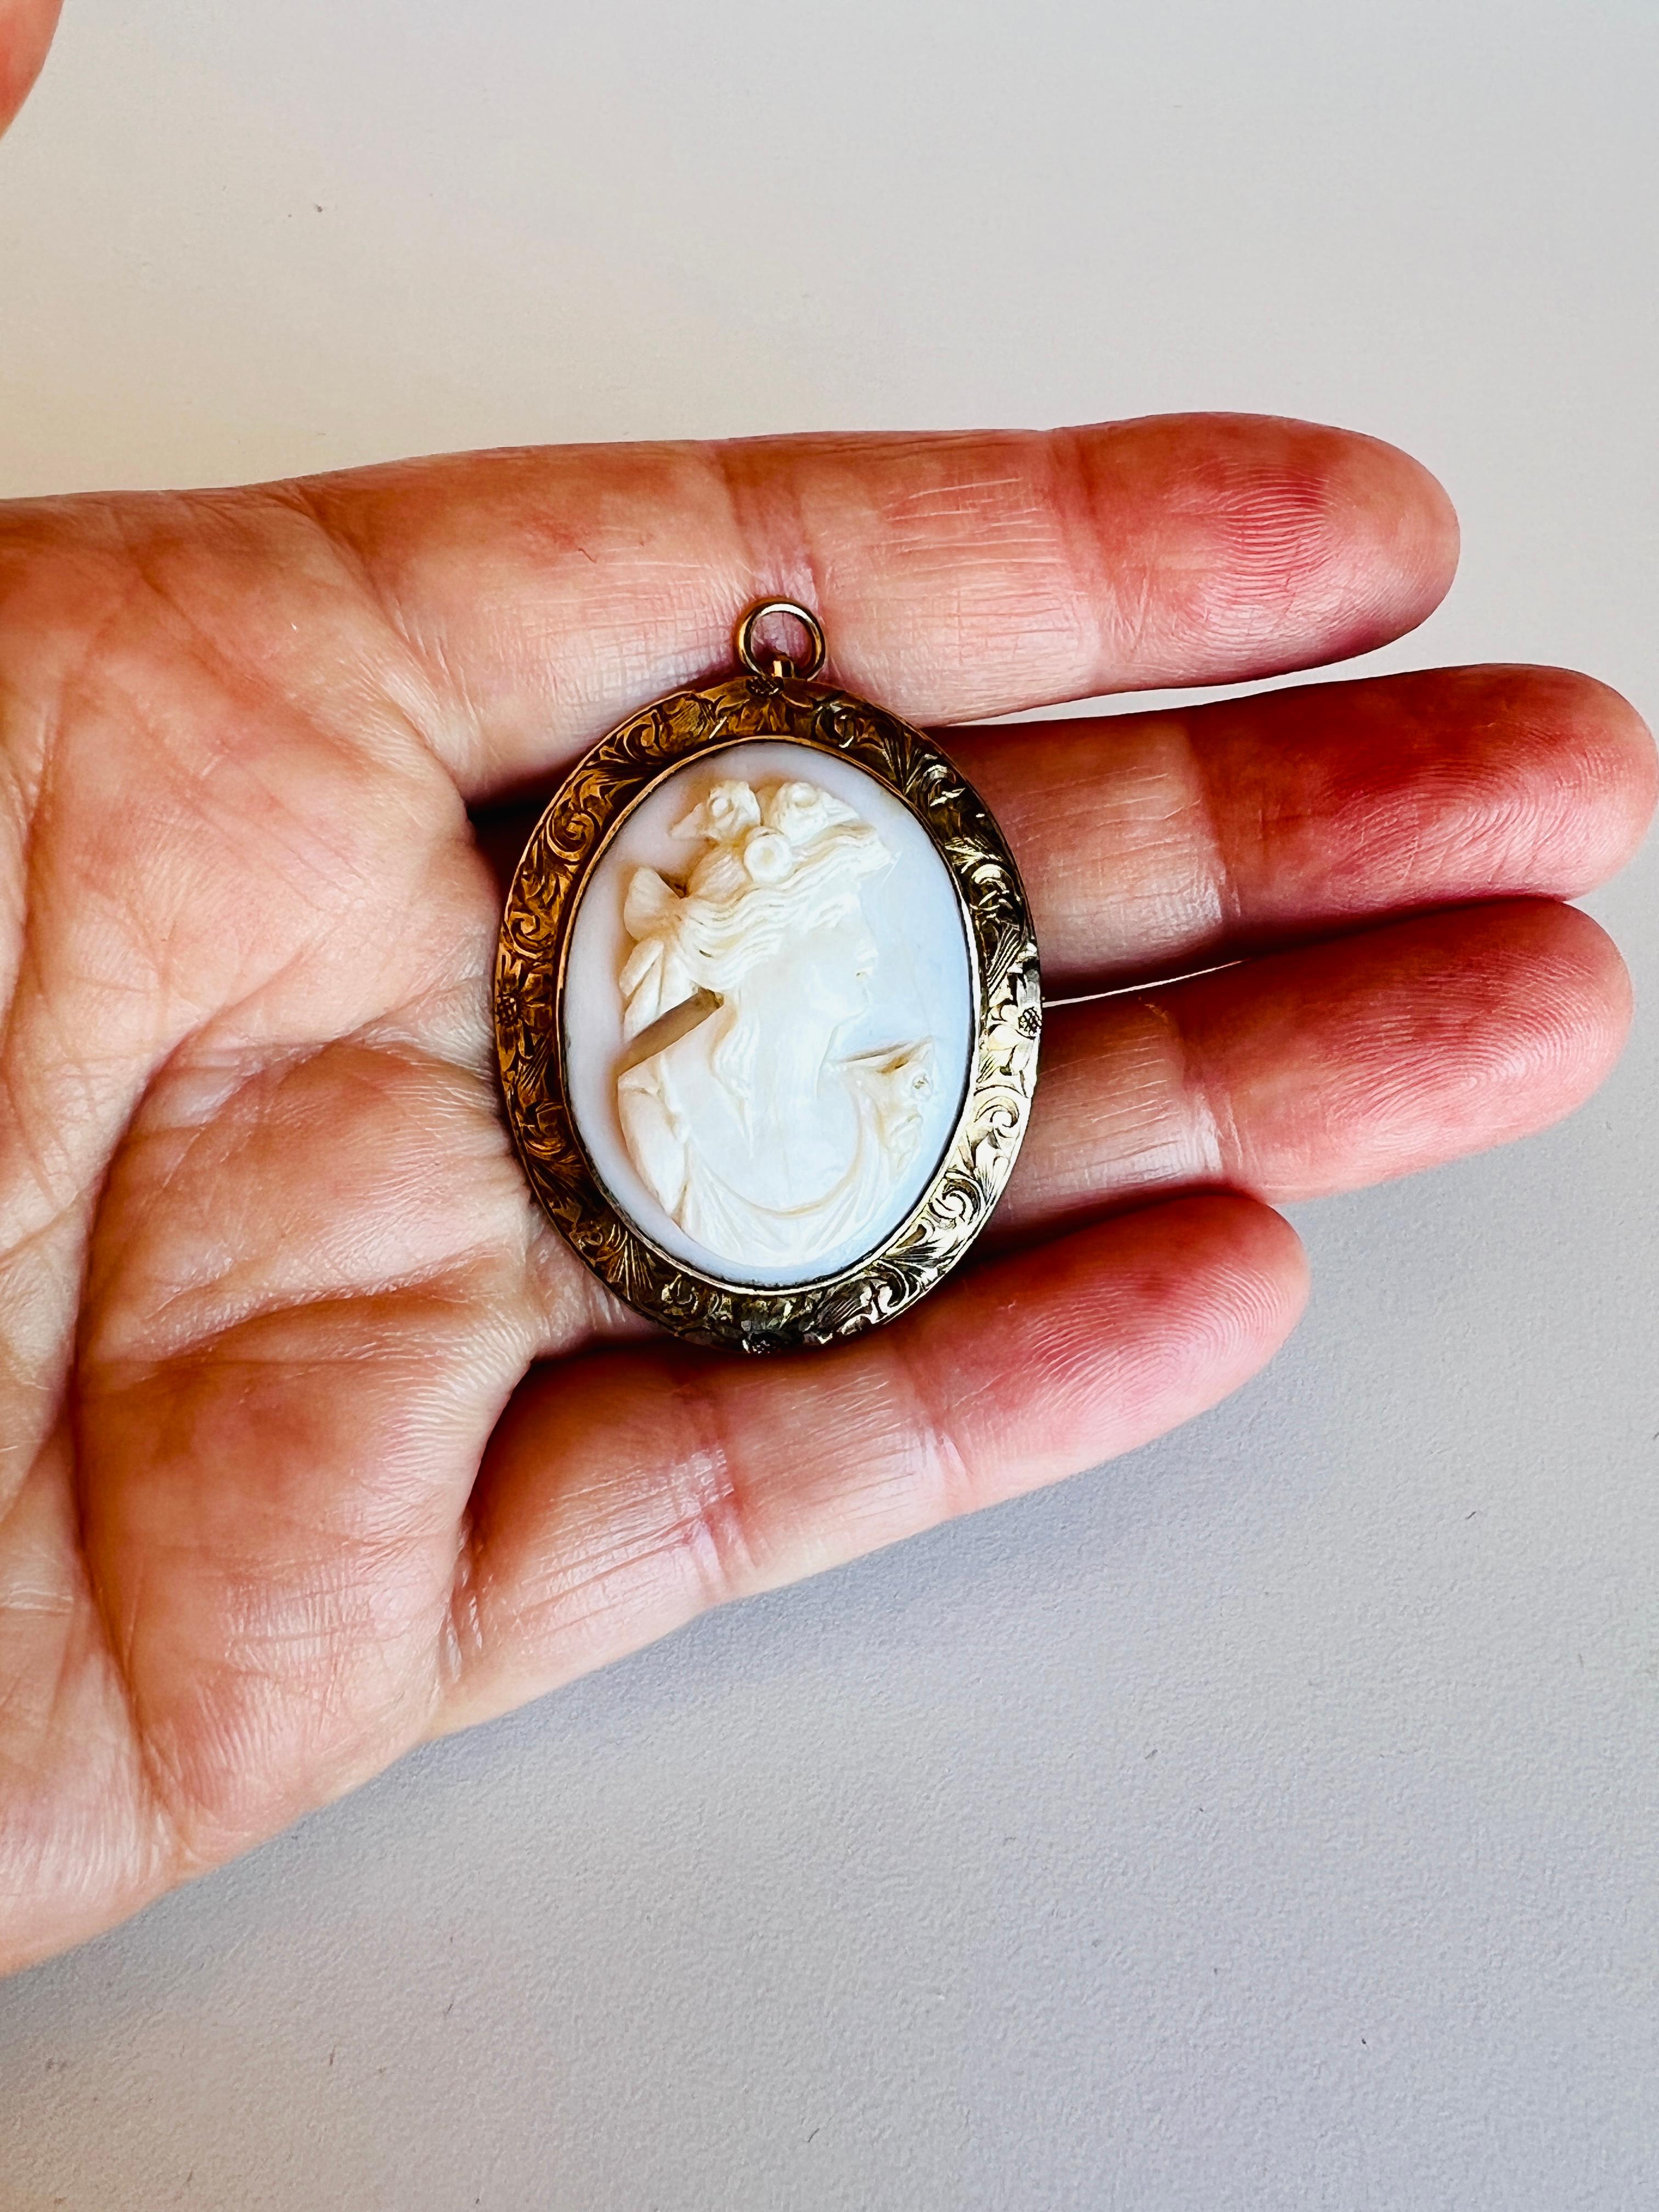 Men's 10k Rose Gold Antique Victorian Cameo Shell Brooch & Necklace Pendant